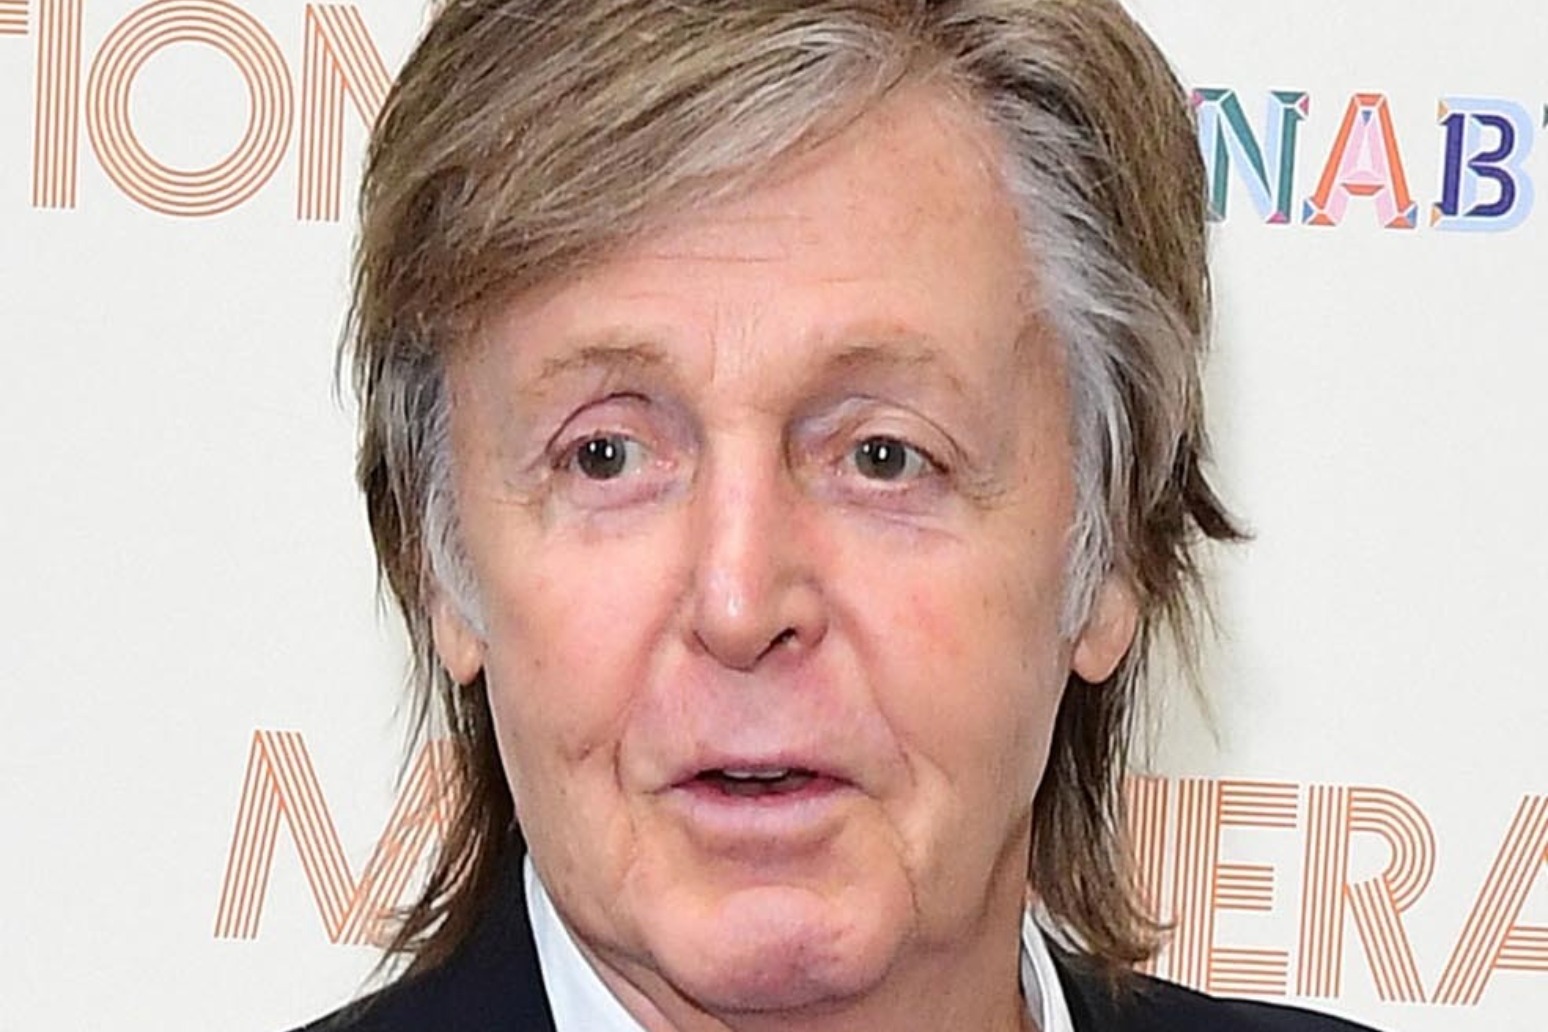 Sir Paul McCartney is ‘a leader of men and women’, says Michael Buble 